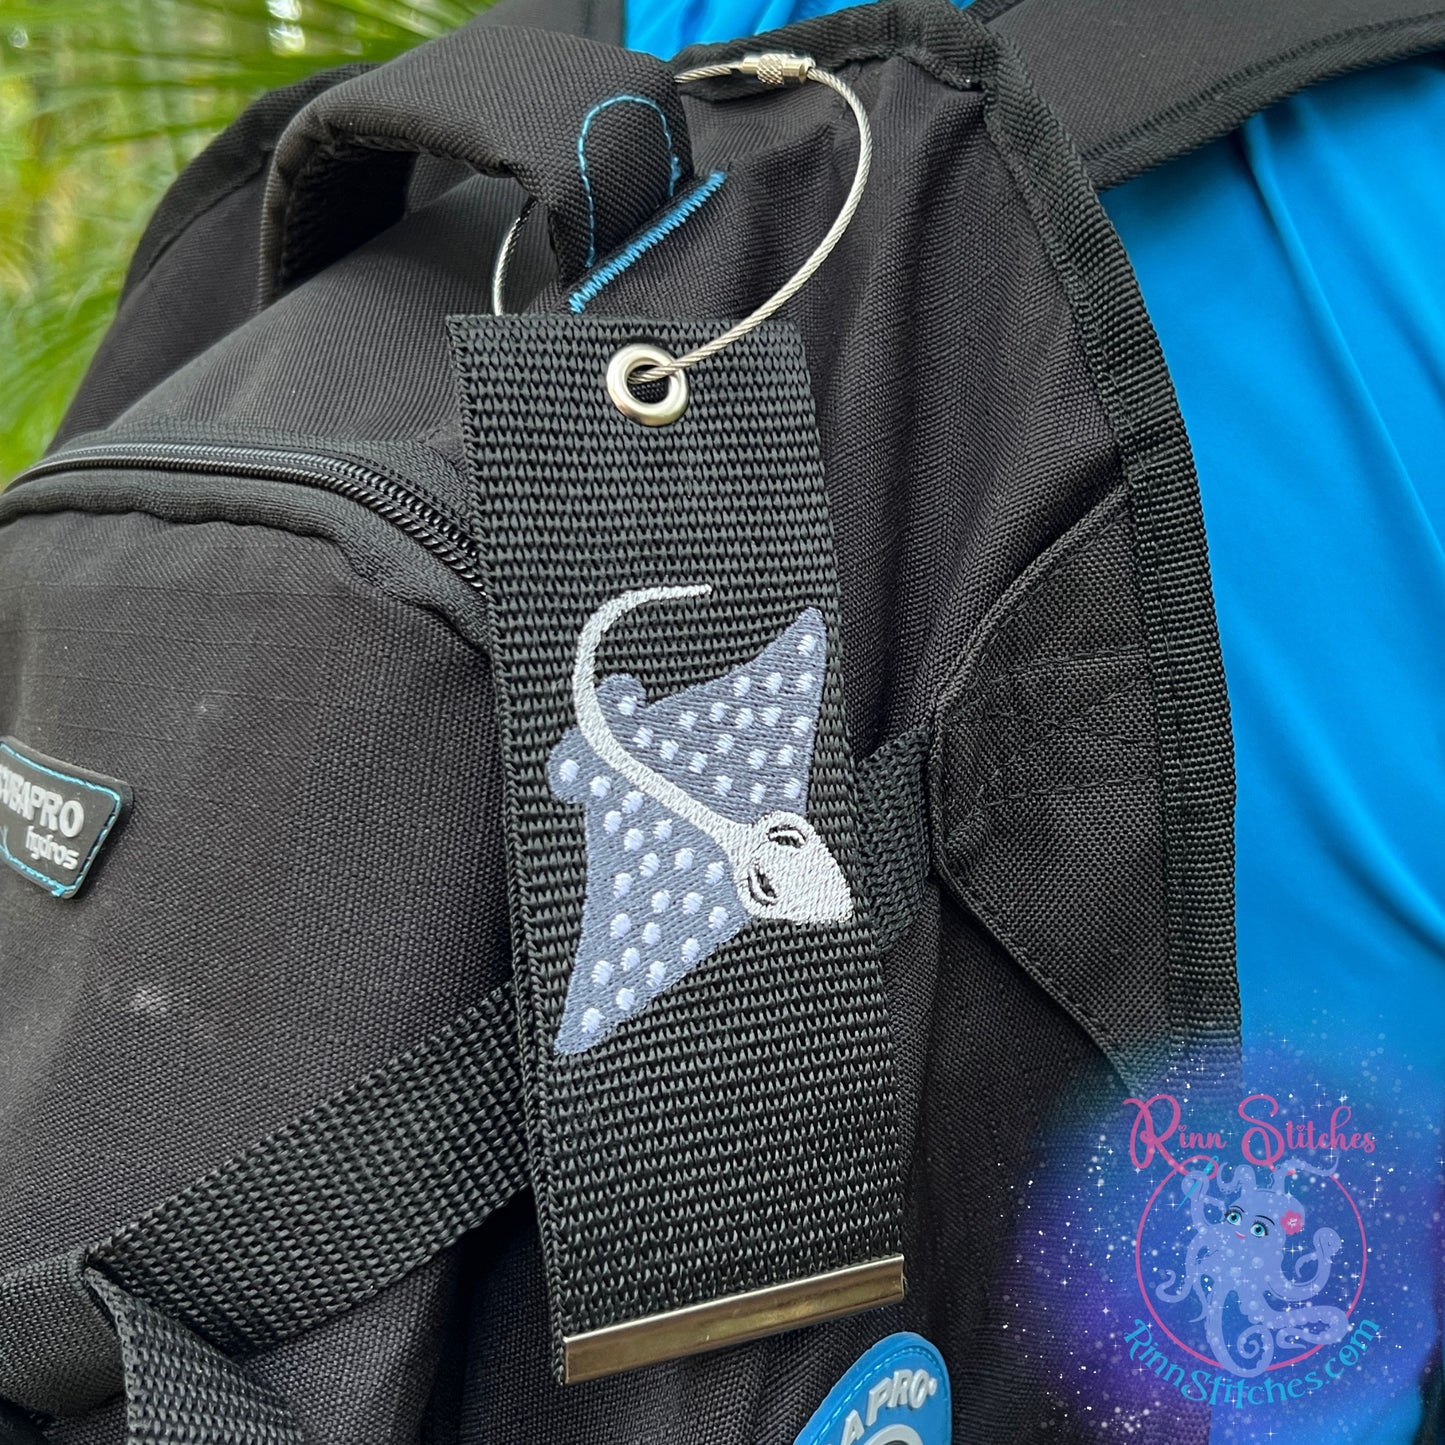 Eagle Ray Luggage Tag, Personalized Embroidered Bag Tag for all your Travel needs by Rinn Stitches Maui, Hawaii